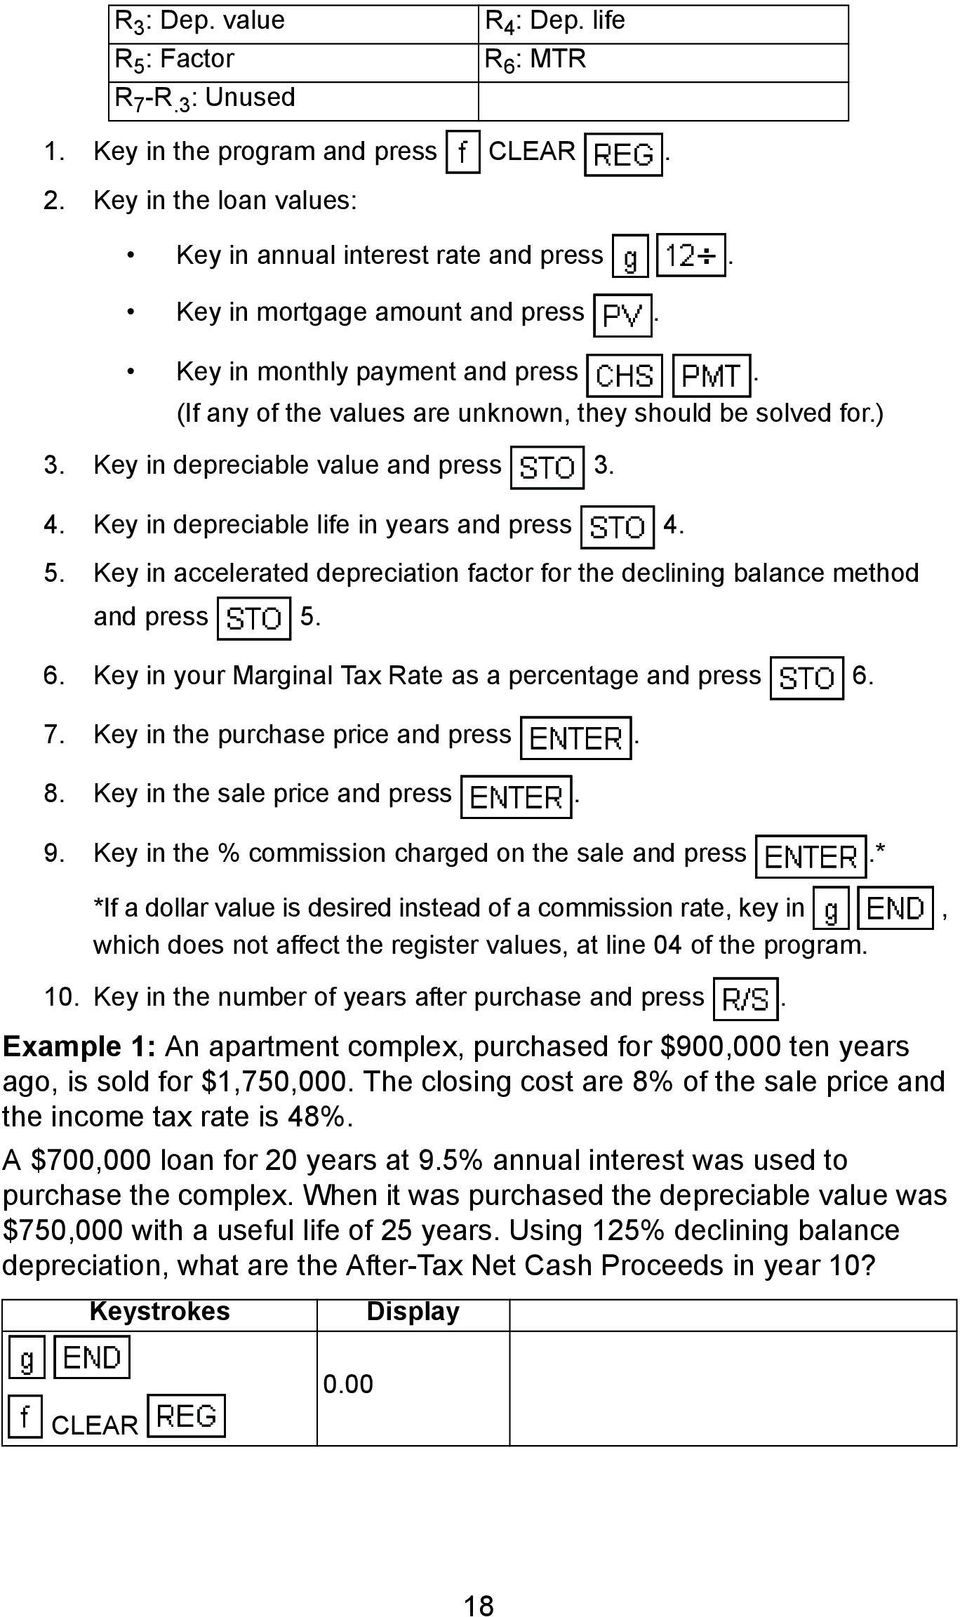 Key in depreciable life in years and press 4. 5. Key in accelerated depreciation factor for the declining balance method and press 5. 6. Key in your Marginal Tax Rate as a percentage and press 6. 7.